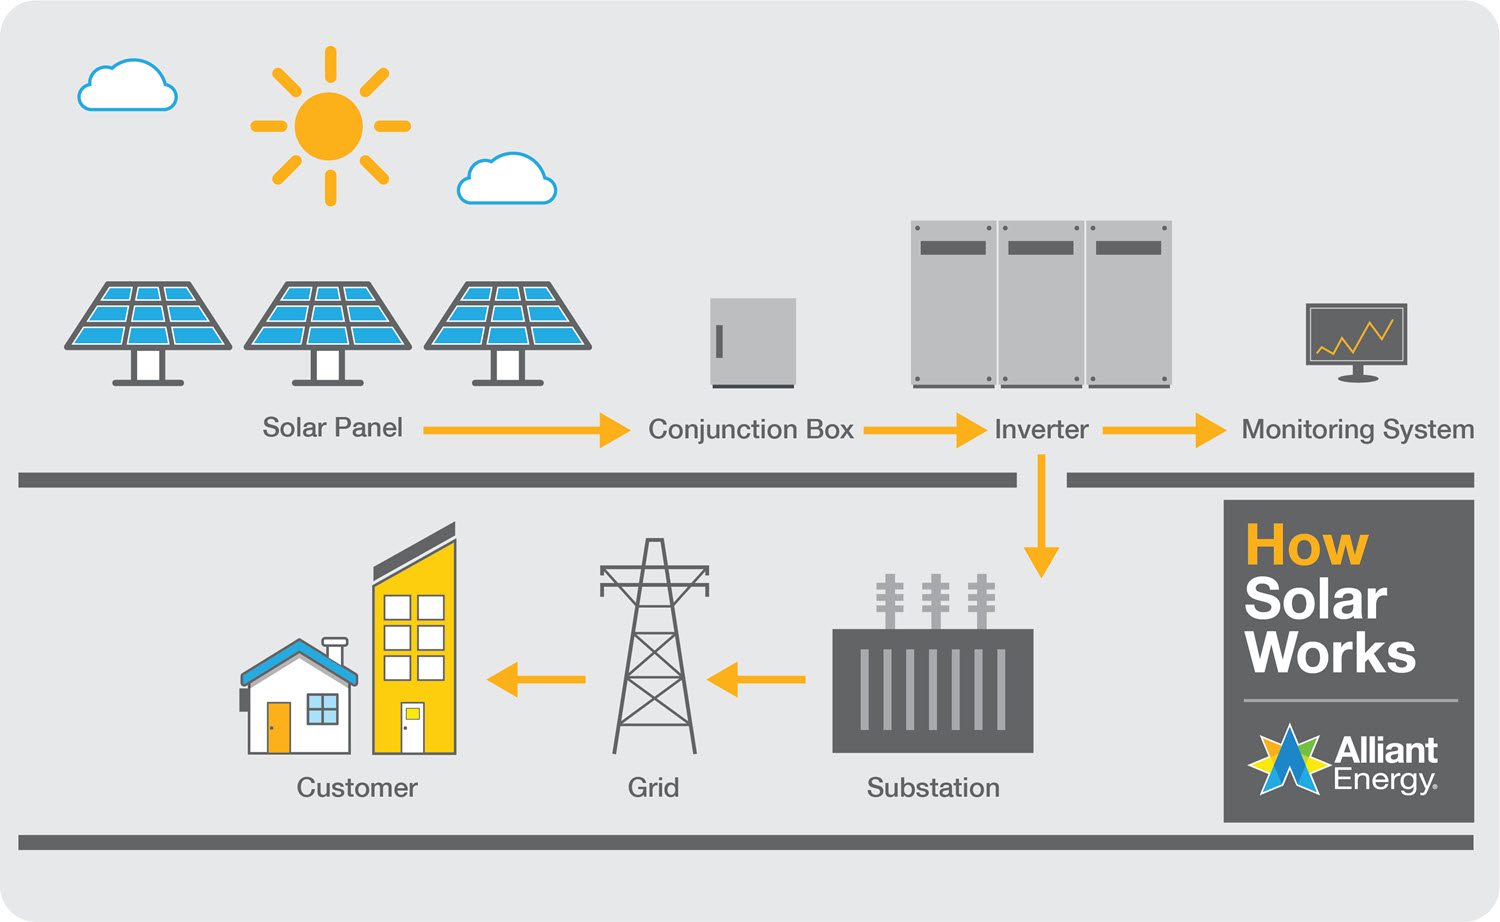 How solar works graphic